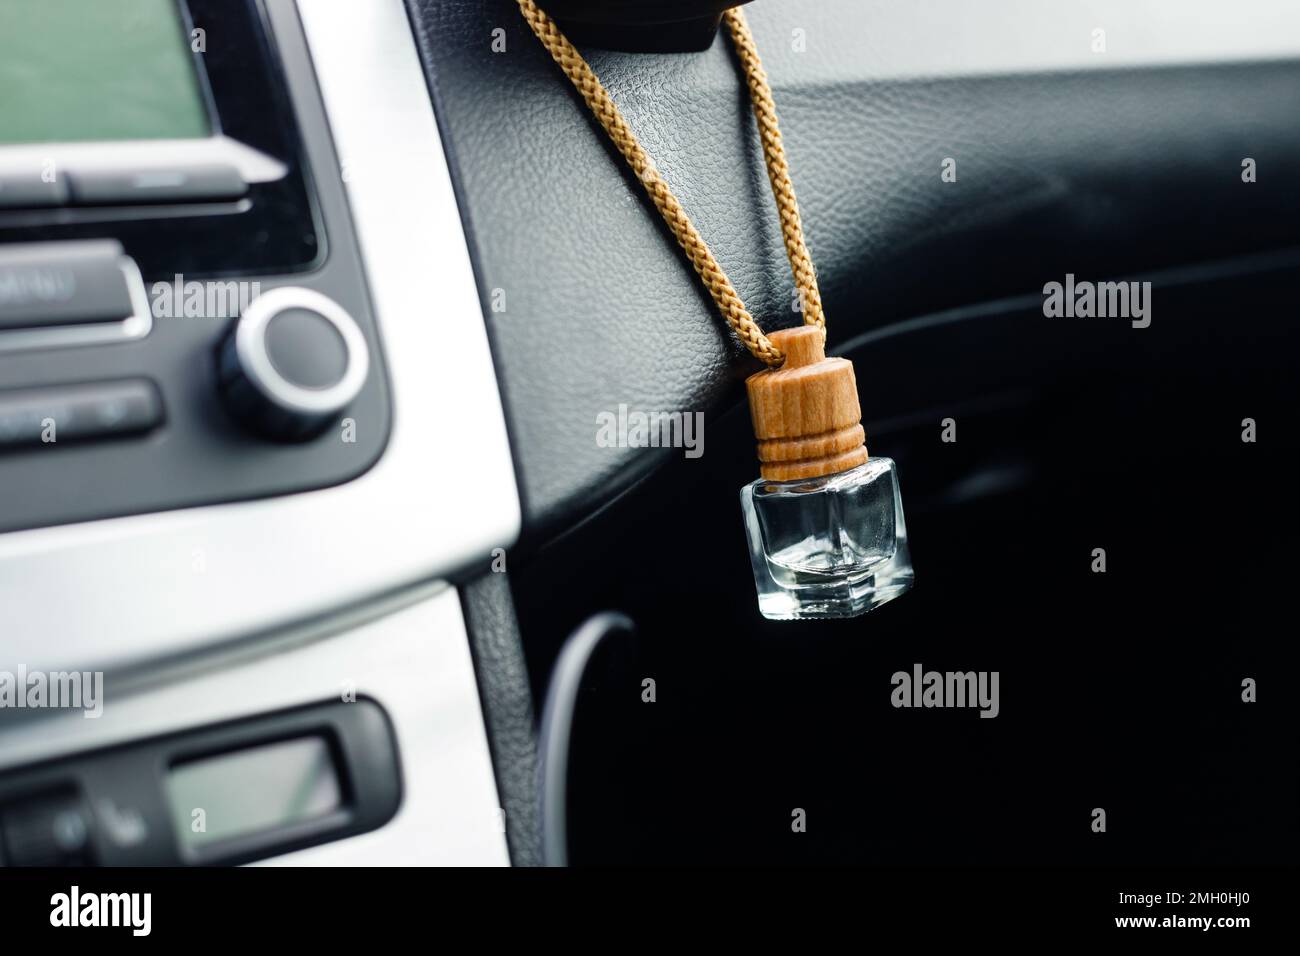 Small aroma glass jar car air freshener hanging on dashboard in vehicle saloon Stock Photo